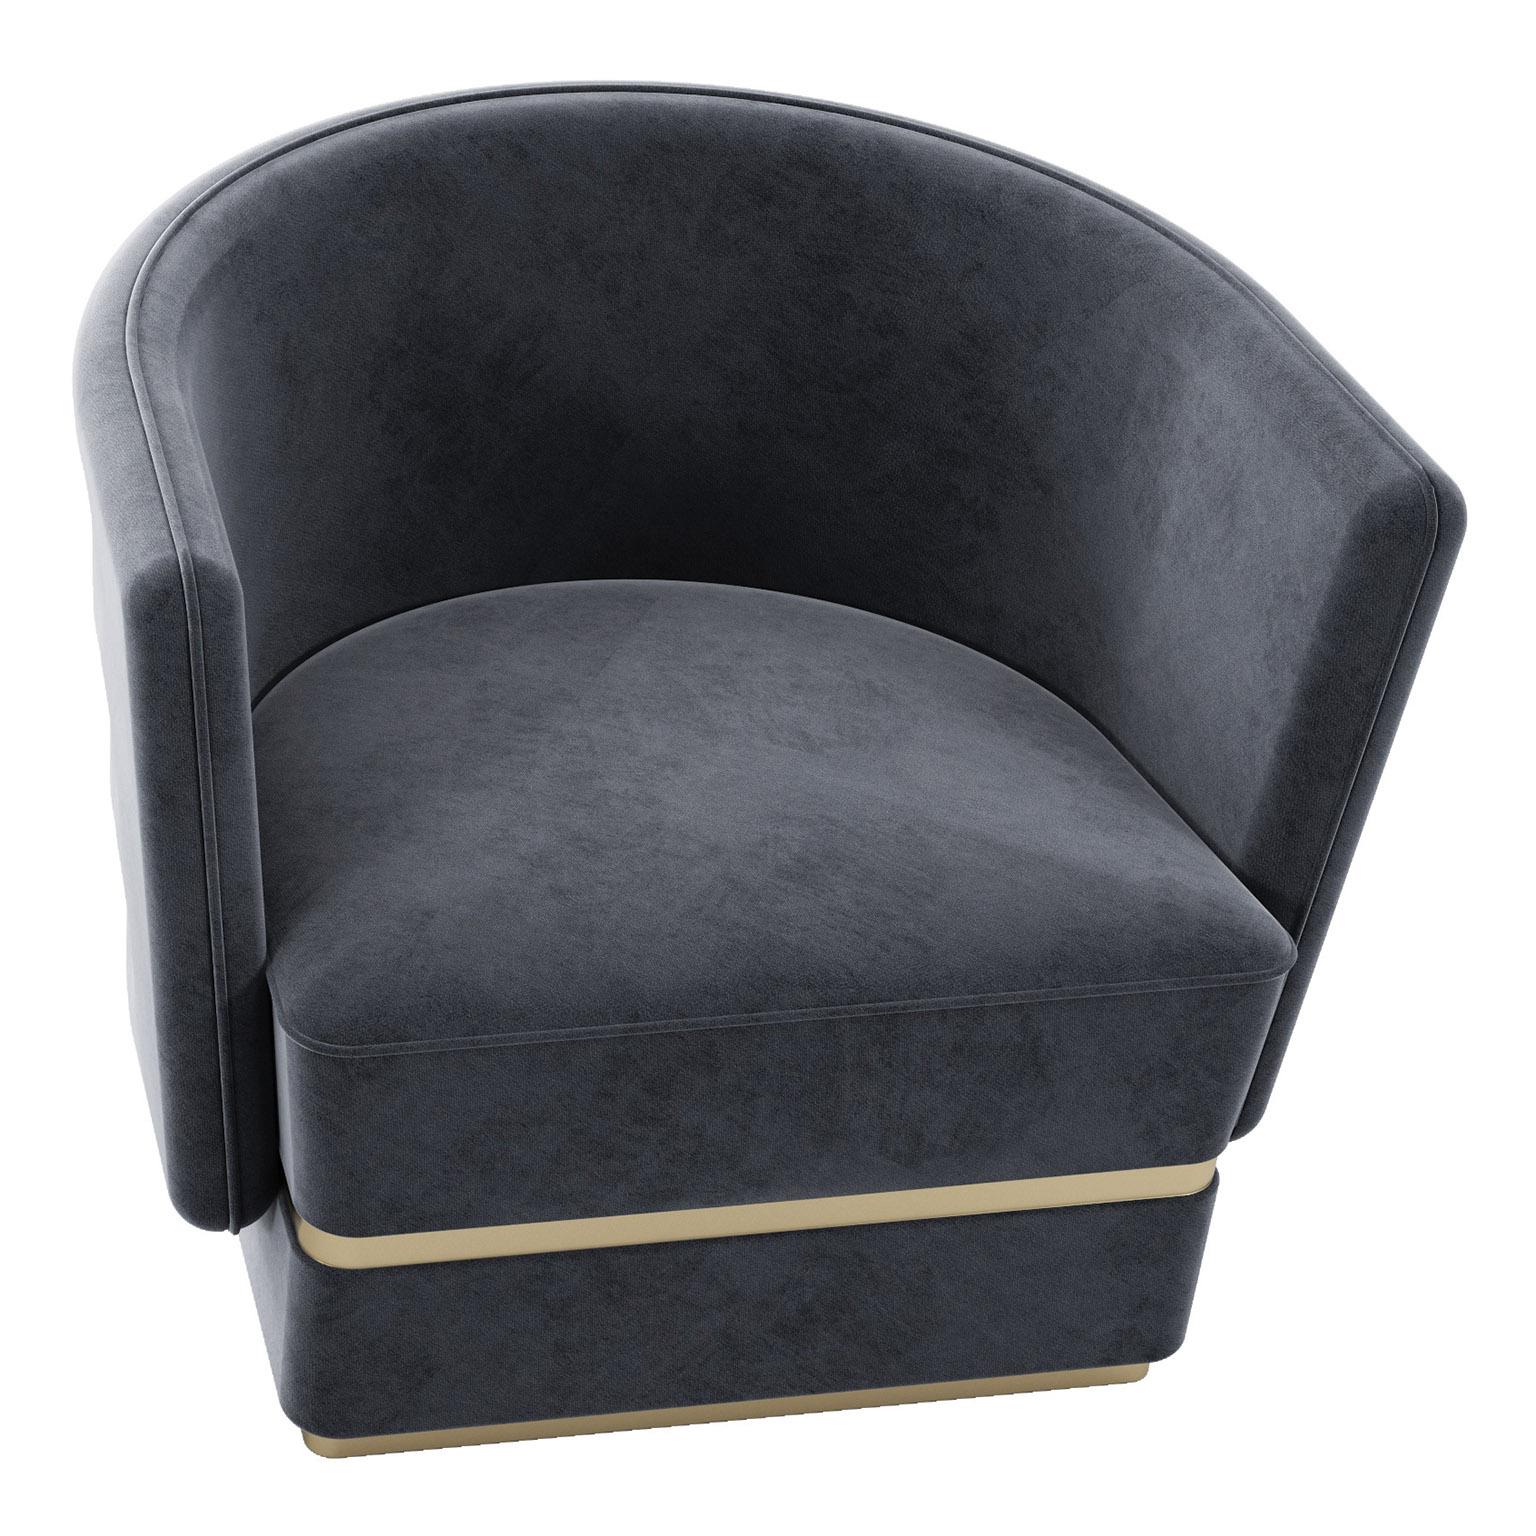 With inspiring details such as the brushed brass buttons and lacquered base in brass color, POEMA is an elegant armchair, suitable for any room decor.‎‎ Available in a wide range of fabrics, eco-leather, natural leathers or COM.‎‎

Shown upholstered